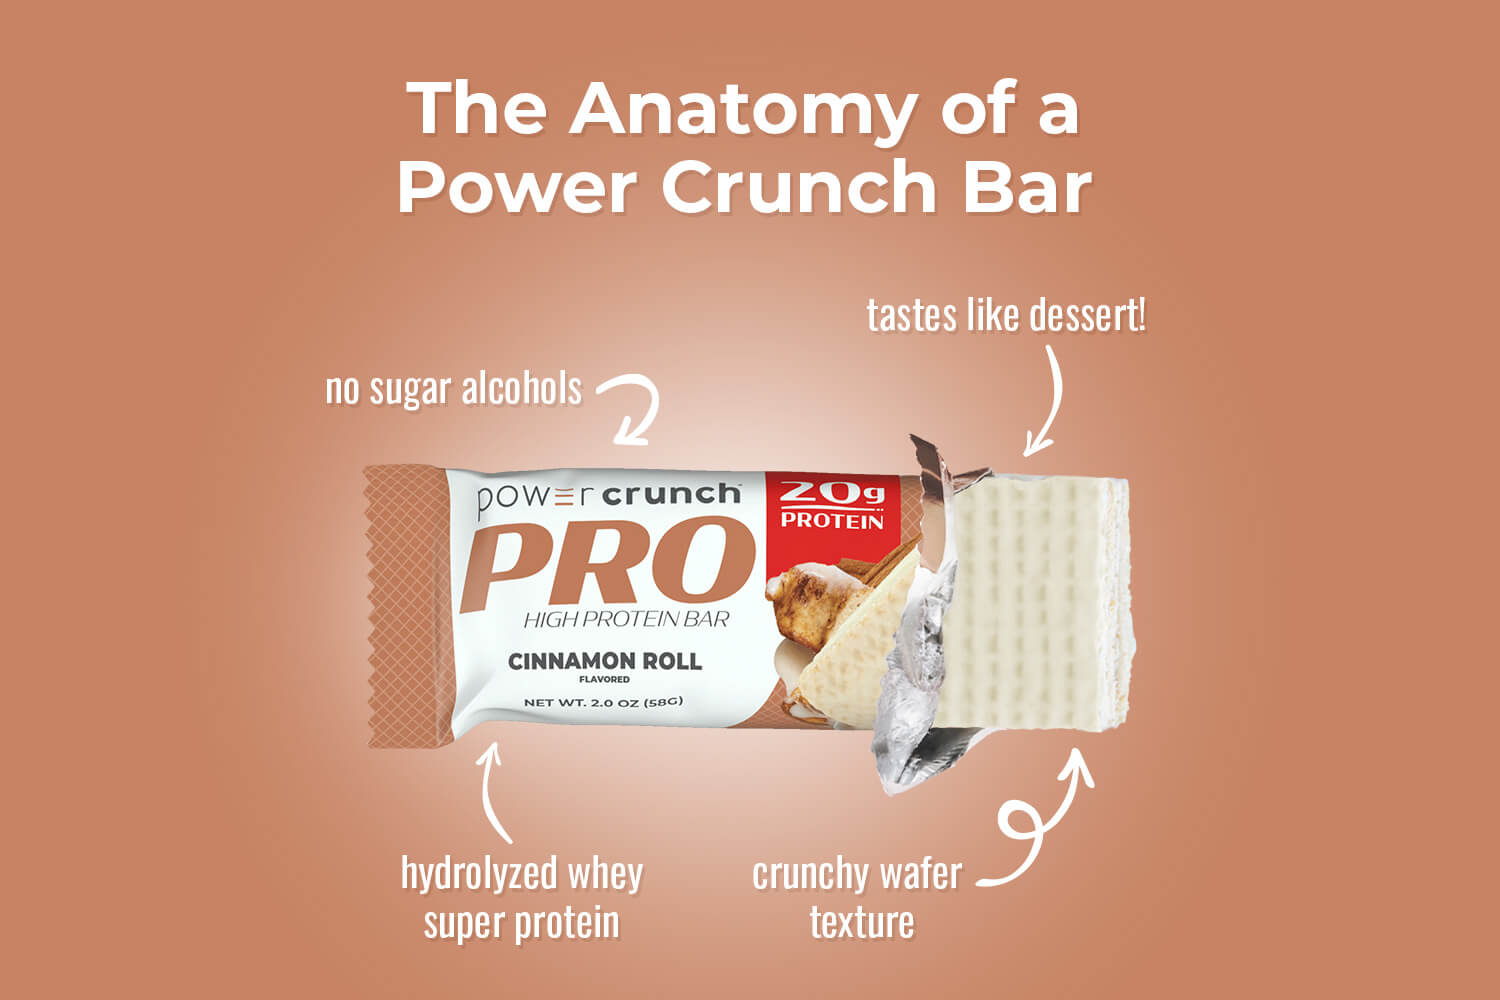 cinnamon roll high protein bars with no sugar alcohols, hydrolyzed whey protein, and crunchy wafer texture